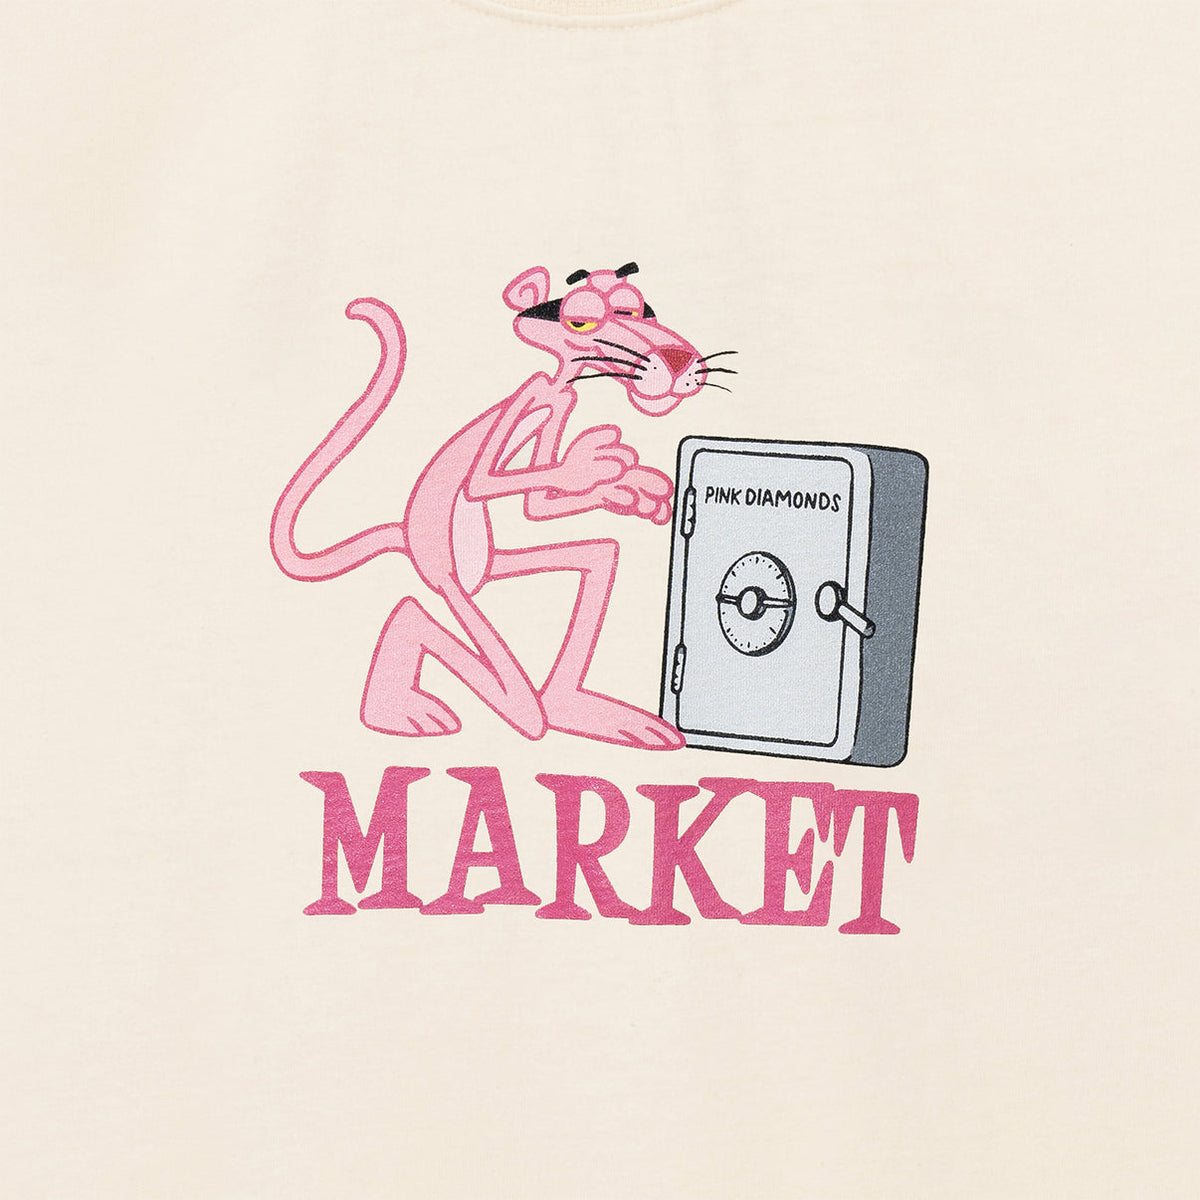 Pink Panther Call My Lawyer Tee - Ecru